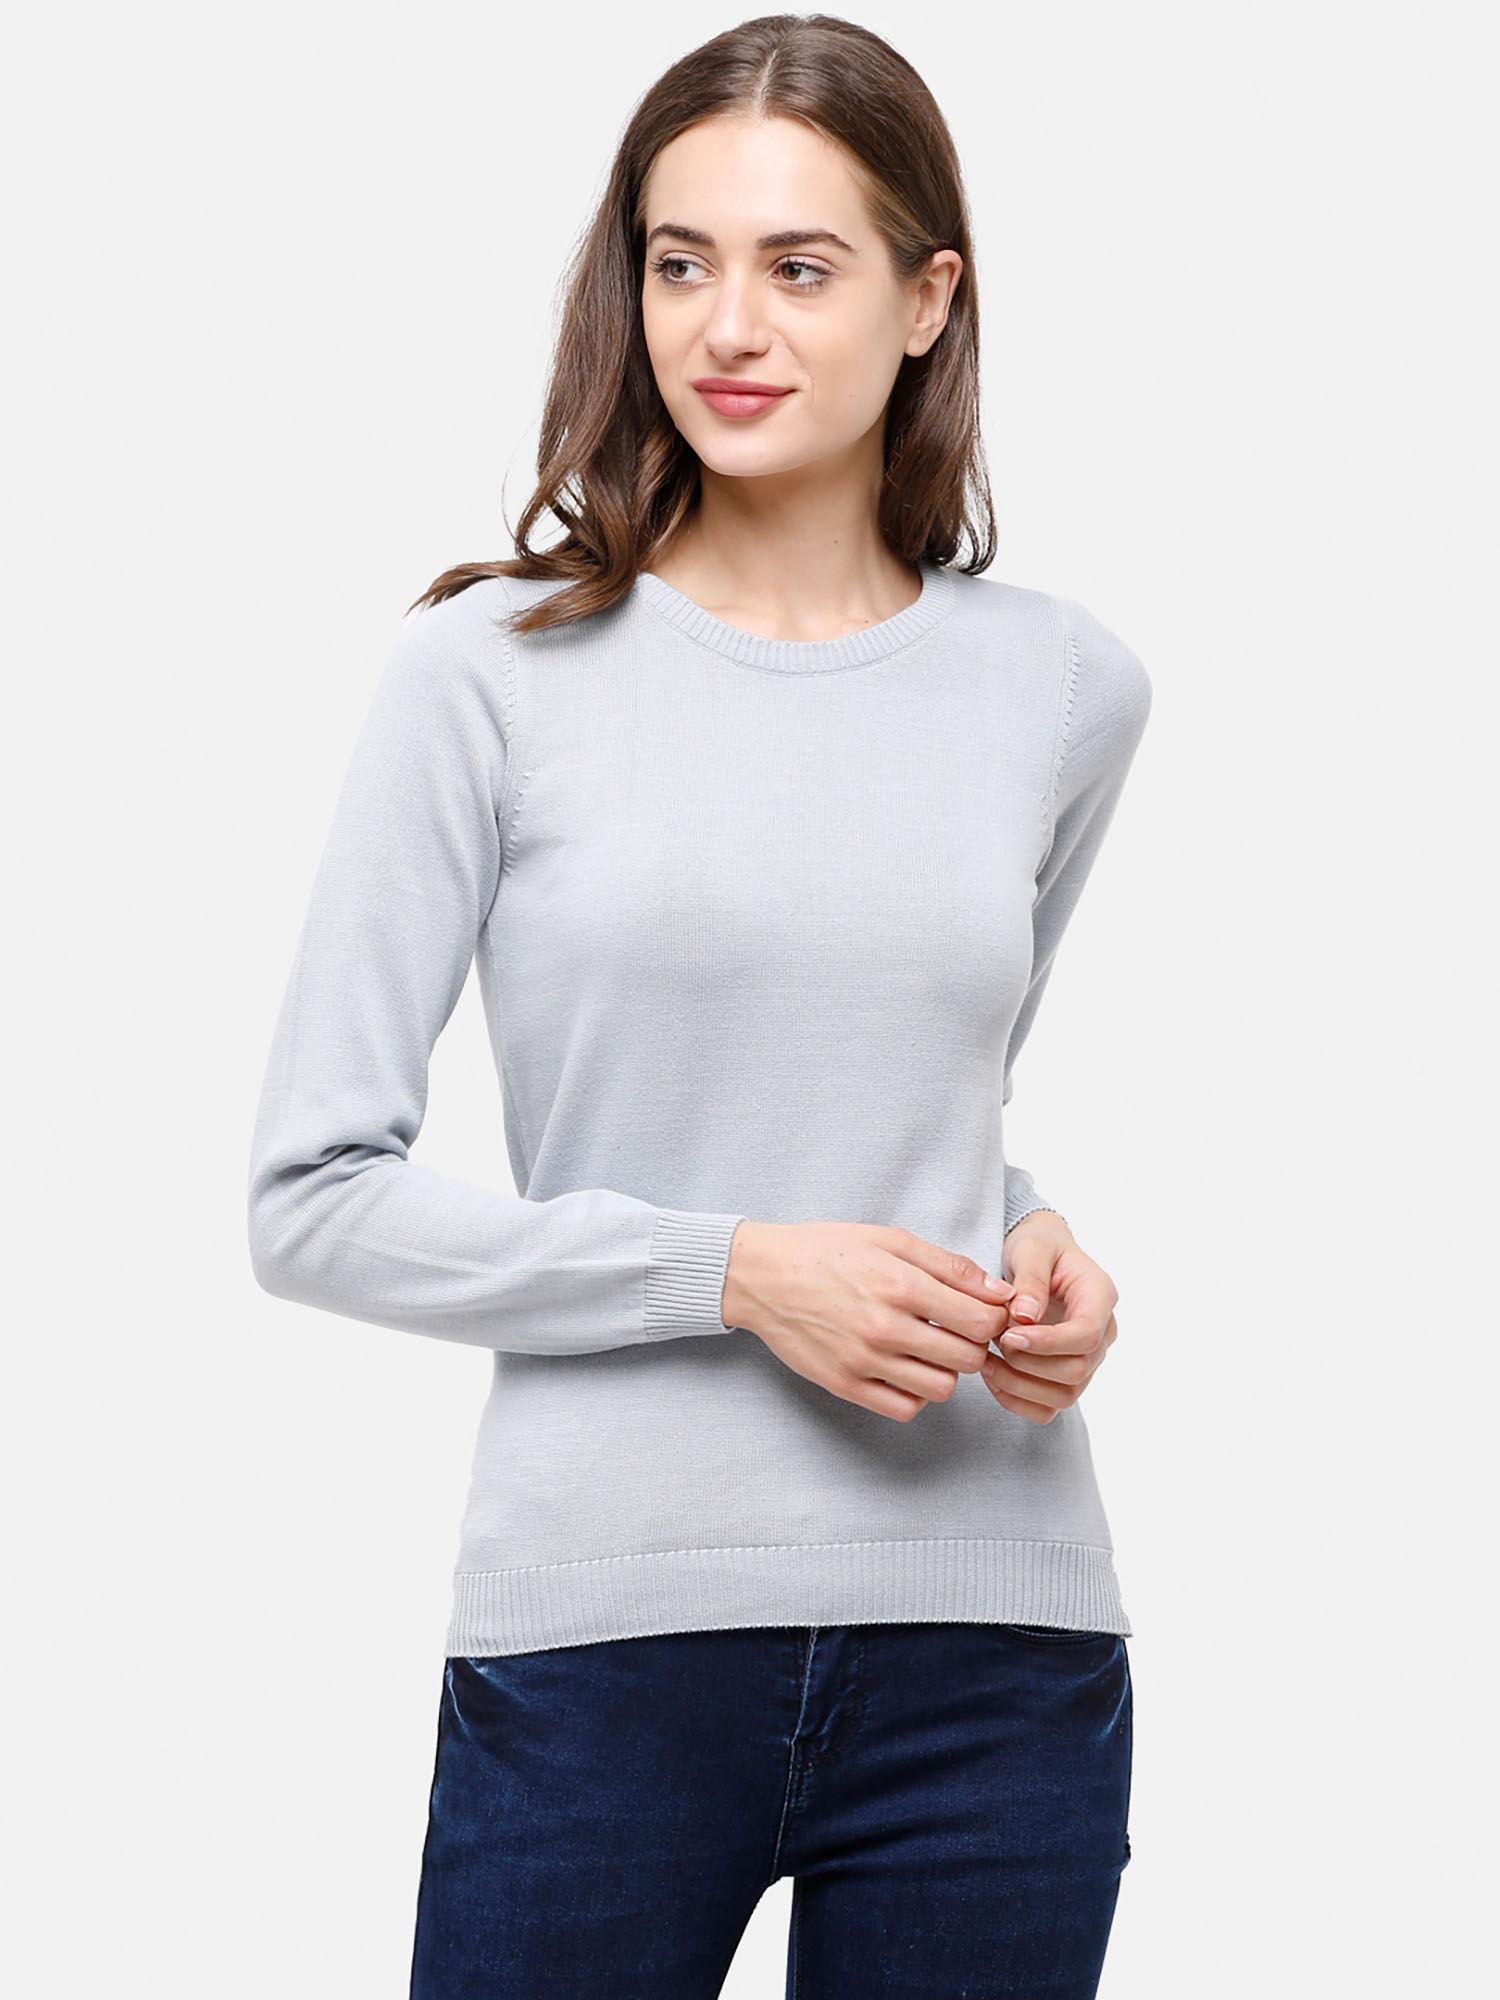 98 degree north's grey full sleeves sweater